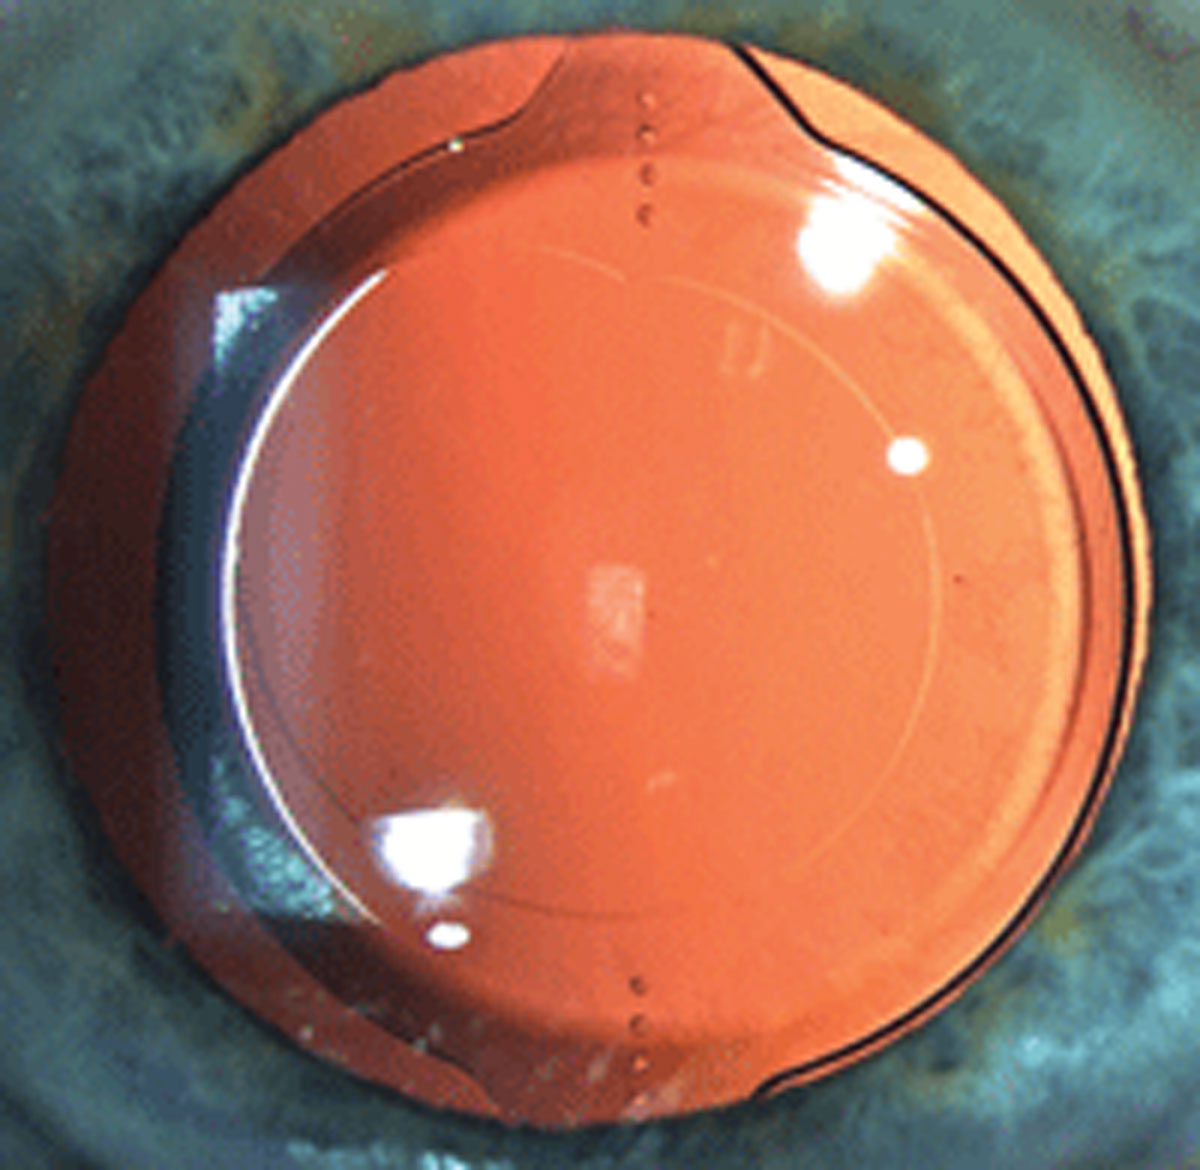 Predicted refractive astigmatism was shown to effectively aid in cataract surgery evaluation and determination of potential IOL outcomes.